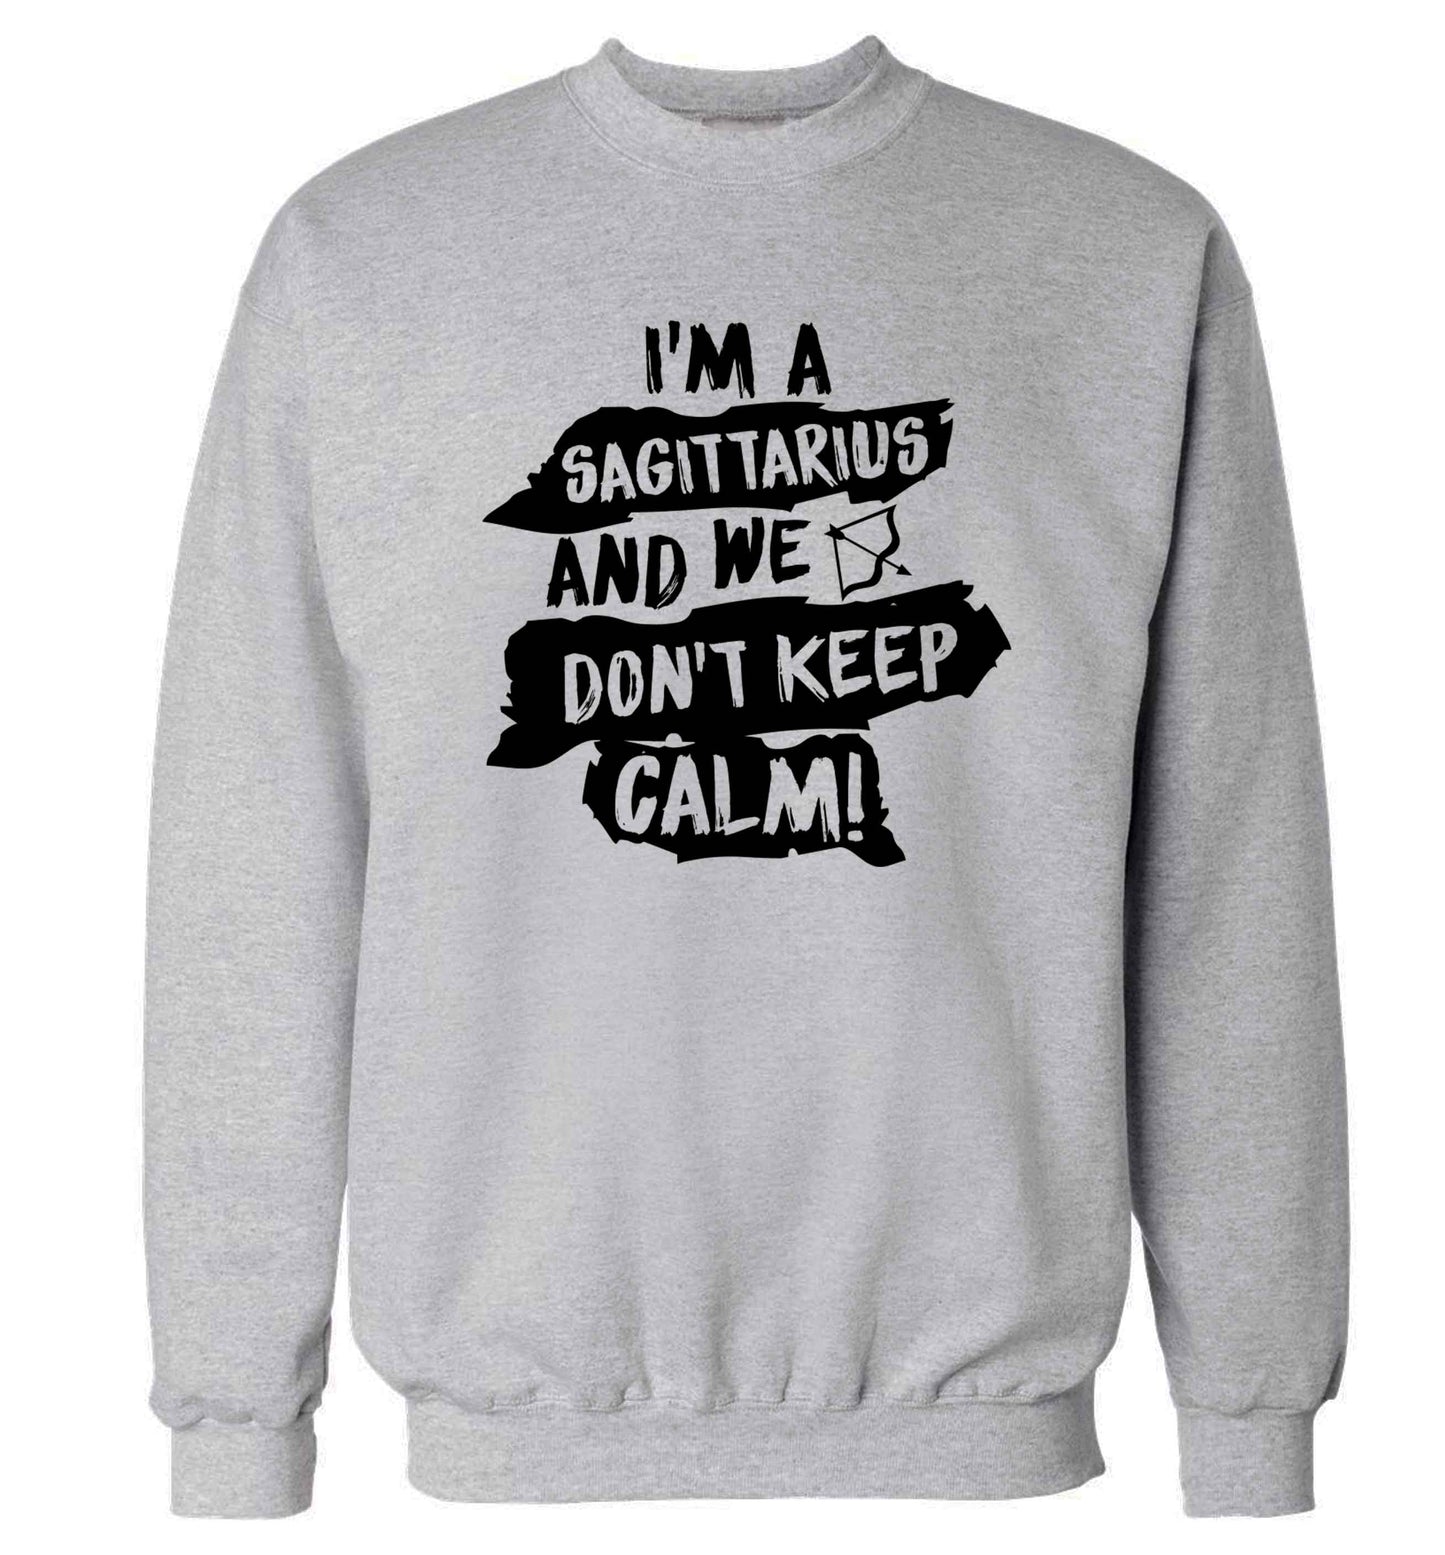 I'm a sagittarius and we don't keep calm Adult's unisex grey Sweater 2XL